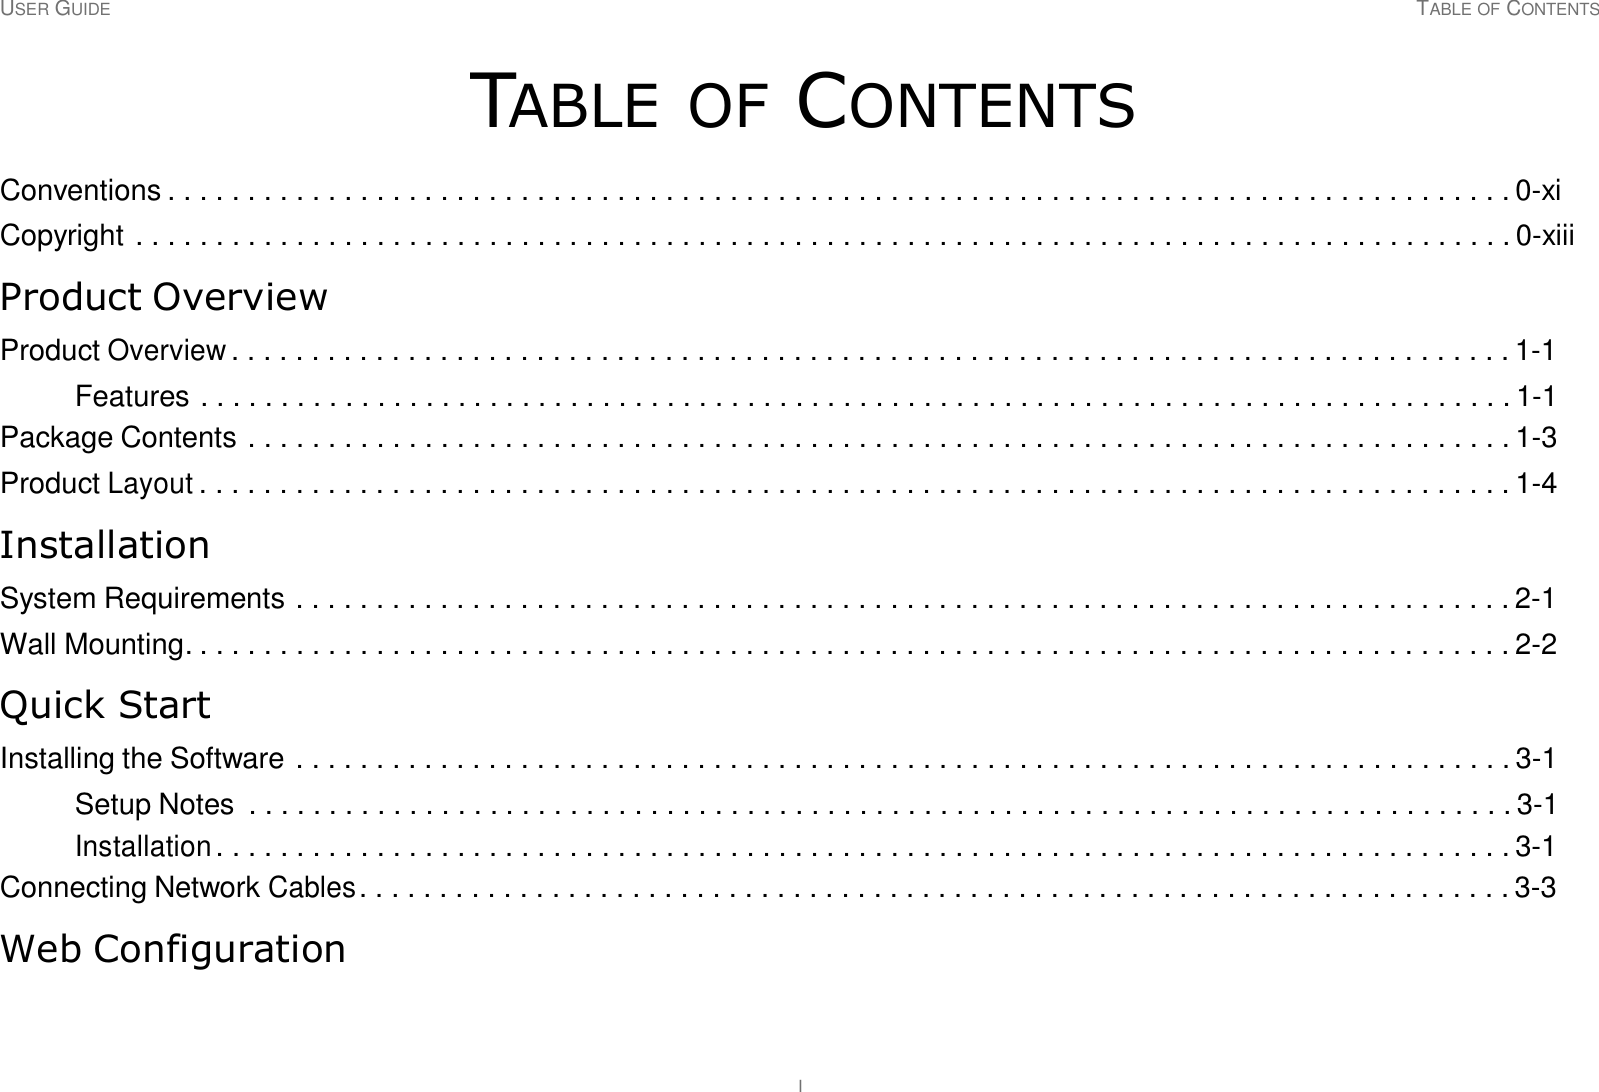 USER GUIDE TABLE OF CONTENTS I     TABLE OF CONTENTS  Conventions . . . . . . . . . . . . . . . . . . . . . . . . . . . . . . . . . . . . . . . . . . . . . . . . . . . . . . . . . . . . . . . . . . . . . . . . . . . . . . . . . . . . 0-xi  Copyright . . . . . . . . . . . . . . . . . . . . . . . . . . . . . . . . . . . . . . . . . . . . . . . . . . . . . . . . . . . . . . . . . . . . . . . . . . . . . . . . . . . . . . 0-xiii  Product Overview  Product Overview . . . . . . . . . . . . . . . . . . . . . . . . . . . . . . . . . . . . . . . . . . . . . . . . . . . . . . . . . . . . . . . . . . . . . . . . . . . . . . . . 1-1  Features . . . . . . . . . . . . . . . . . . . . . . . . . . . . . . . . . . . . . . . . . . . . . . . . . . . . . . . . . . . . . . . . . . . . . . . . . . . . . . . . . . 1-1 Package Contents . . . . . . . . . . . . . . . . . . . . . . . . . . . . . . . . . . . . . . . . . . . . . . . . . . . . . . . . . . . . . . . . . . . . . . . . . . . . . . . 1-3  Product Layout . . . . . . . . . . . . . . . . . . . . . . . . . . . . . . . . . . . . . . . . . . . . . . . . . . . . . . . . . . . . . . . . . . . . . . . . . . . . . . . . . . 1-4  Installation  System Requirements . . . . . . . . . . . . . . . . . . . . . . . . . . . . . . . . . . . . . . . . . . . . . . . . . . . . . . . . . . . . . . . . . . . . . . . . . . . . 2-1  Wall Mounting. . . . . . . . . . . . . . . . . . . . . . . . . . . . . . . . . . . . . . . . . . . . . . . . . . . . . . . . . . . . . . . . . . . . . . . . . . . . . . . . . . . 2-2  Quick Start  Installing the Software . . . . . . . . . . . . . . . . . . . . . . . . . . . . . . . . . . . . . . . . . . . . . . . . . . . . . . . . . . . . . . . . . . . . . . . . . . . . 3-1  Setup Notes  . . . . . . . . . . . . . . . . . . . . . . . . . . . . . . . . . . . . . . . . . . . . . . . . . . . . . . . . . . . . . . . . . . . . . . . . . . . . . . . 3-1 Installation . . . . . . . . . . . . . . . . . . . . . . . . . . . . . . . . . . . . . . . . . . . . . . . . . . . . . . . . . . . . . . . . . . . . . . . . . . . . . . . . . 3-1 Connecting Network Cables . . . . . . . . . . . . . . . . . . . . . . . . . . . . . . . . . . . . . . . . . . . . . . . . . . . . . . . . . . . . . . . . . . . . . . . . 3-3  Web Configuration 